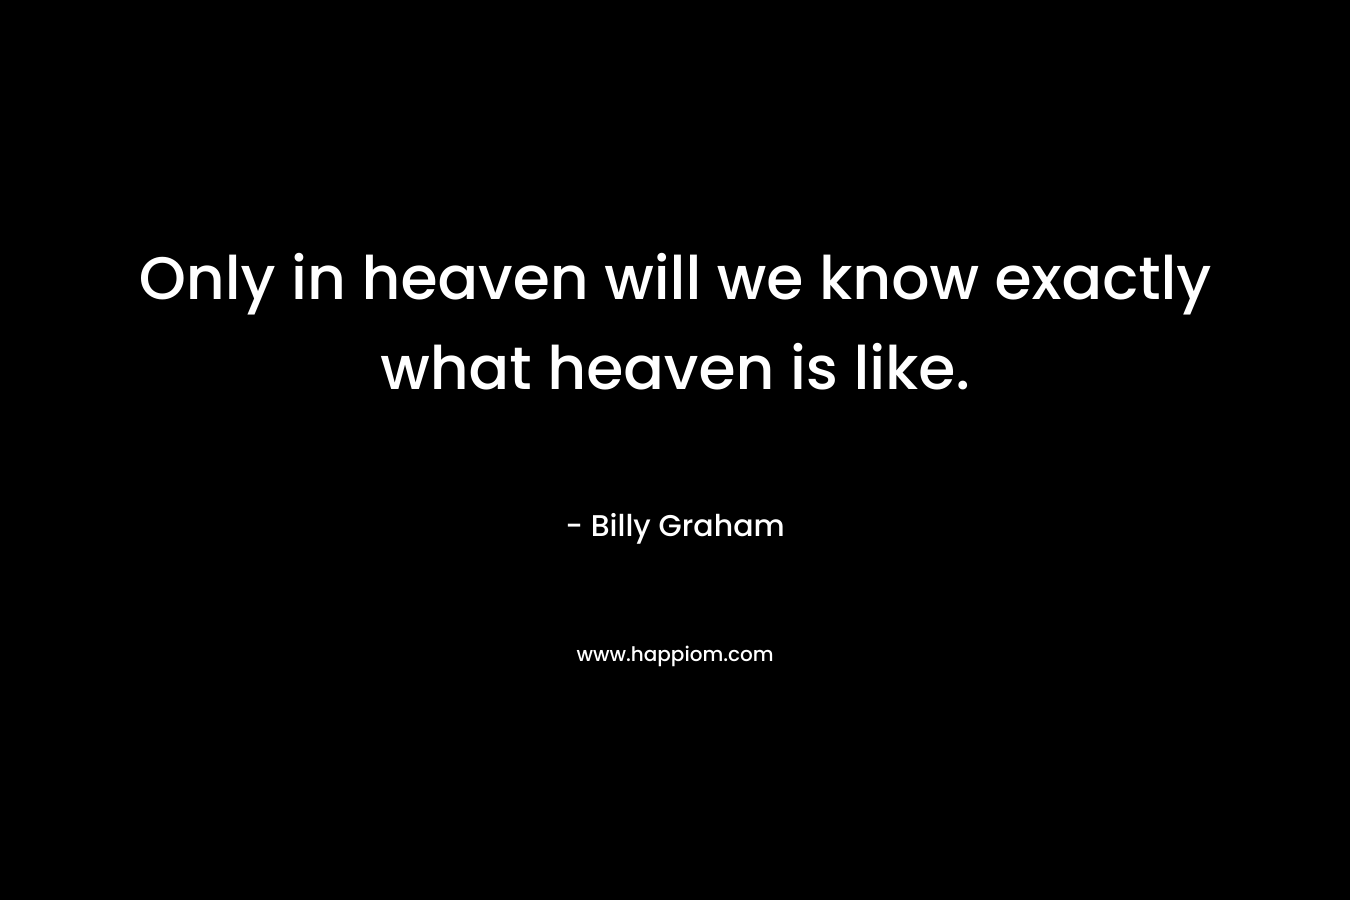 Only in heaven will we know exactly what heaven is like.